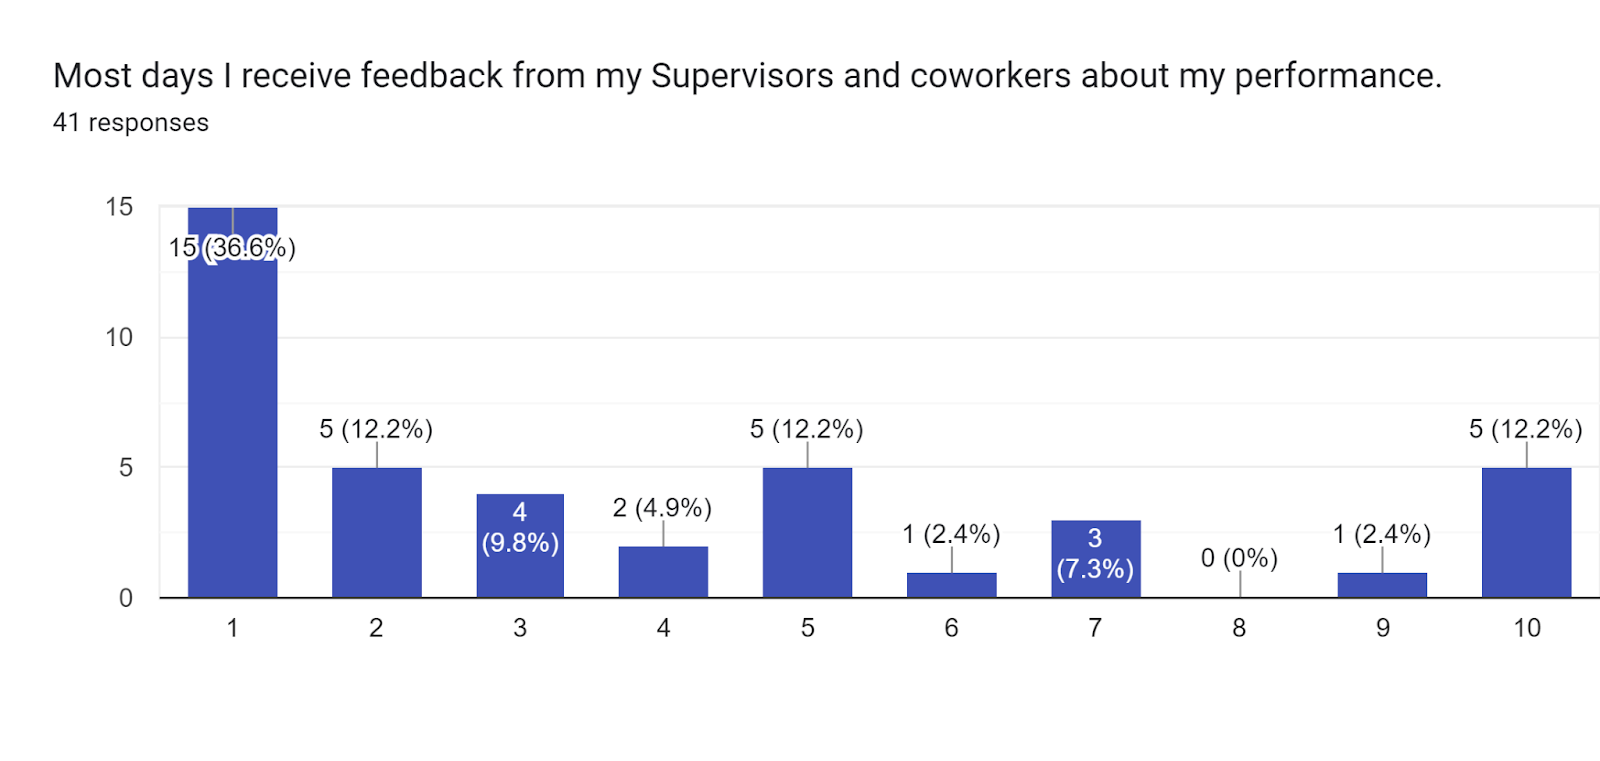 Forms response chart. Question title: Most days I receive feedback from my Supervisors and coworkers about my performance.. Number of responses: 41 responses.